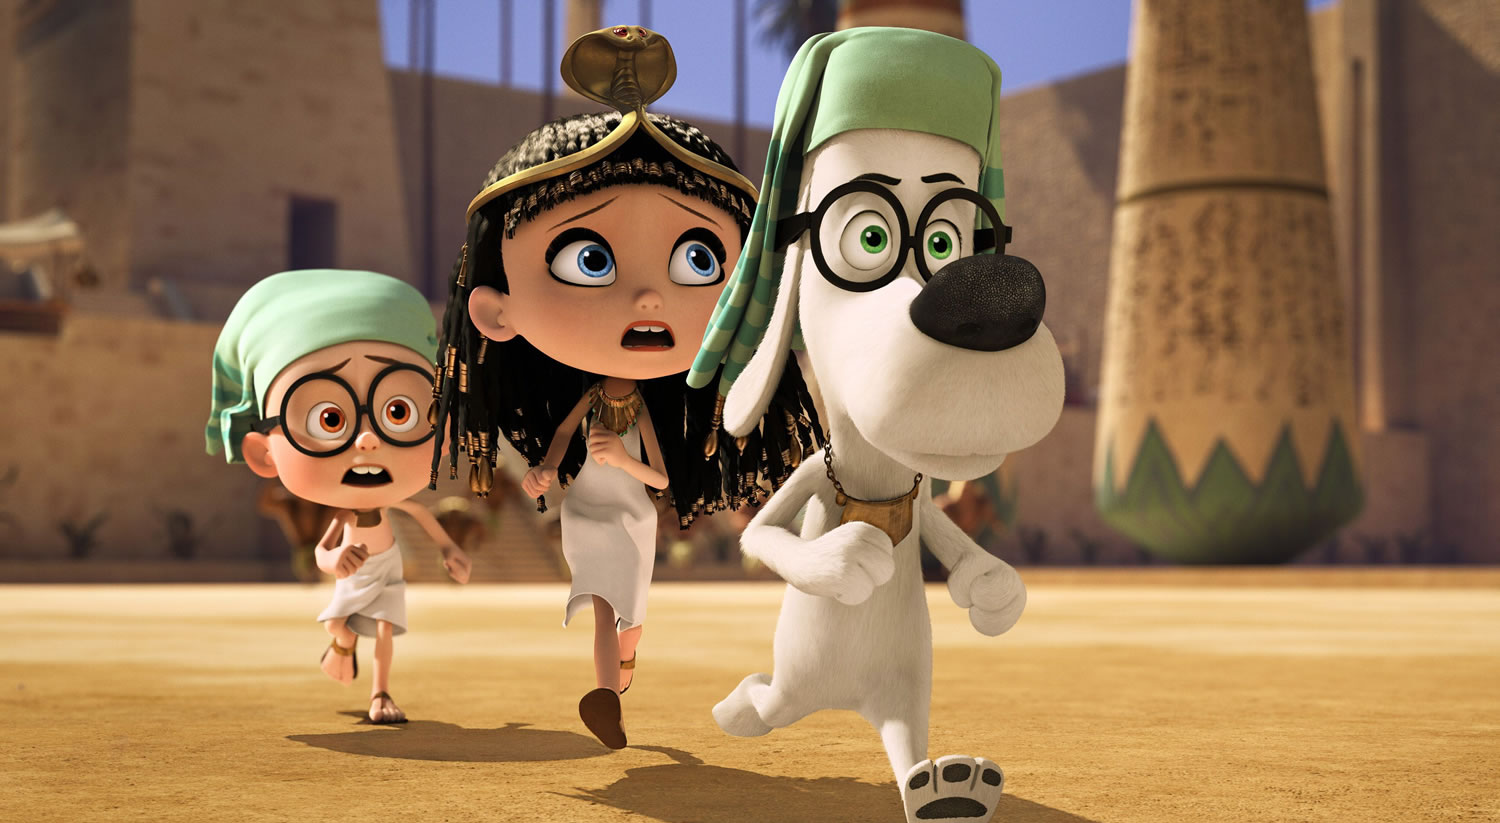 Sherman, voiced by Max Charles, from left, Penny, voiced by Ariel Winter, and Mr. Peabody, voiced by Ty Burell, run &quot;Mr.